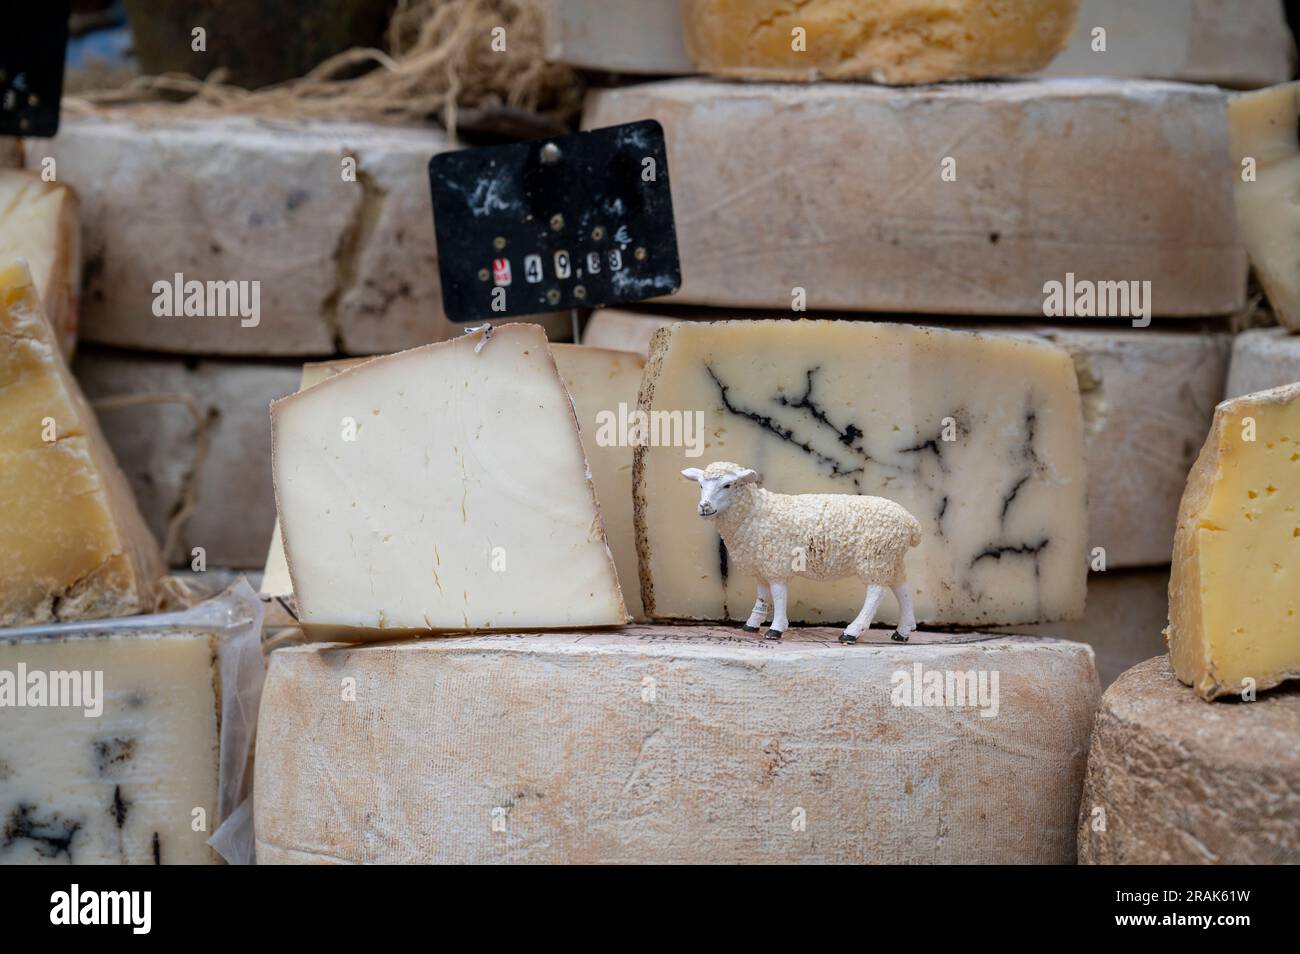 A cheese stall on a market in Chinon Loire Valley, France with cheese piled up for sale. Stock Photo